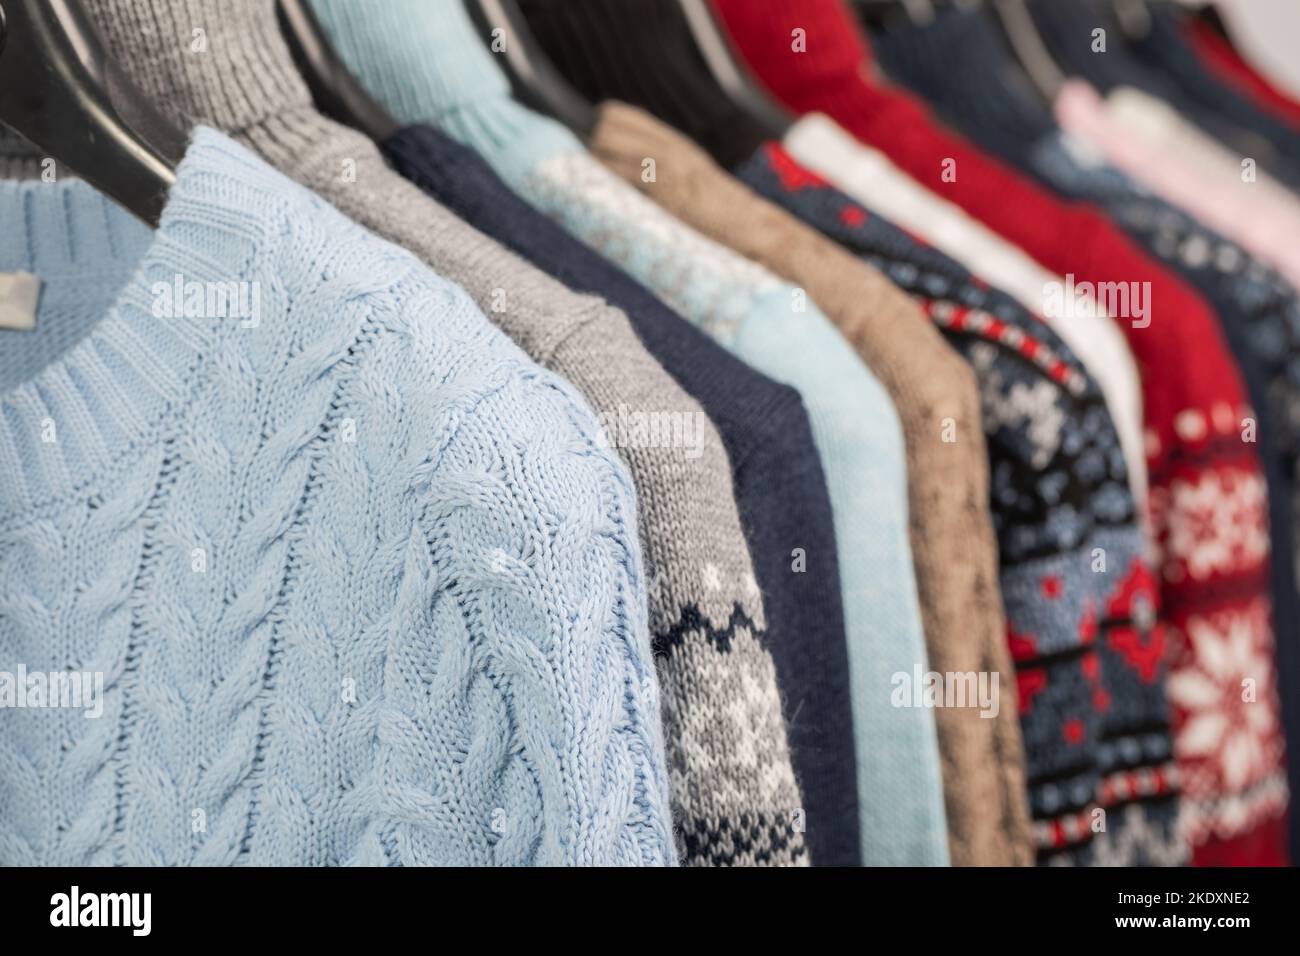 Various vintage sweaters or pullovers on hanger rack in a used goods store. Thrifting and sustainability in clothing concept Stock Photo